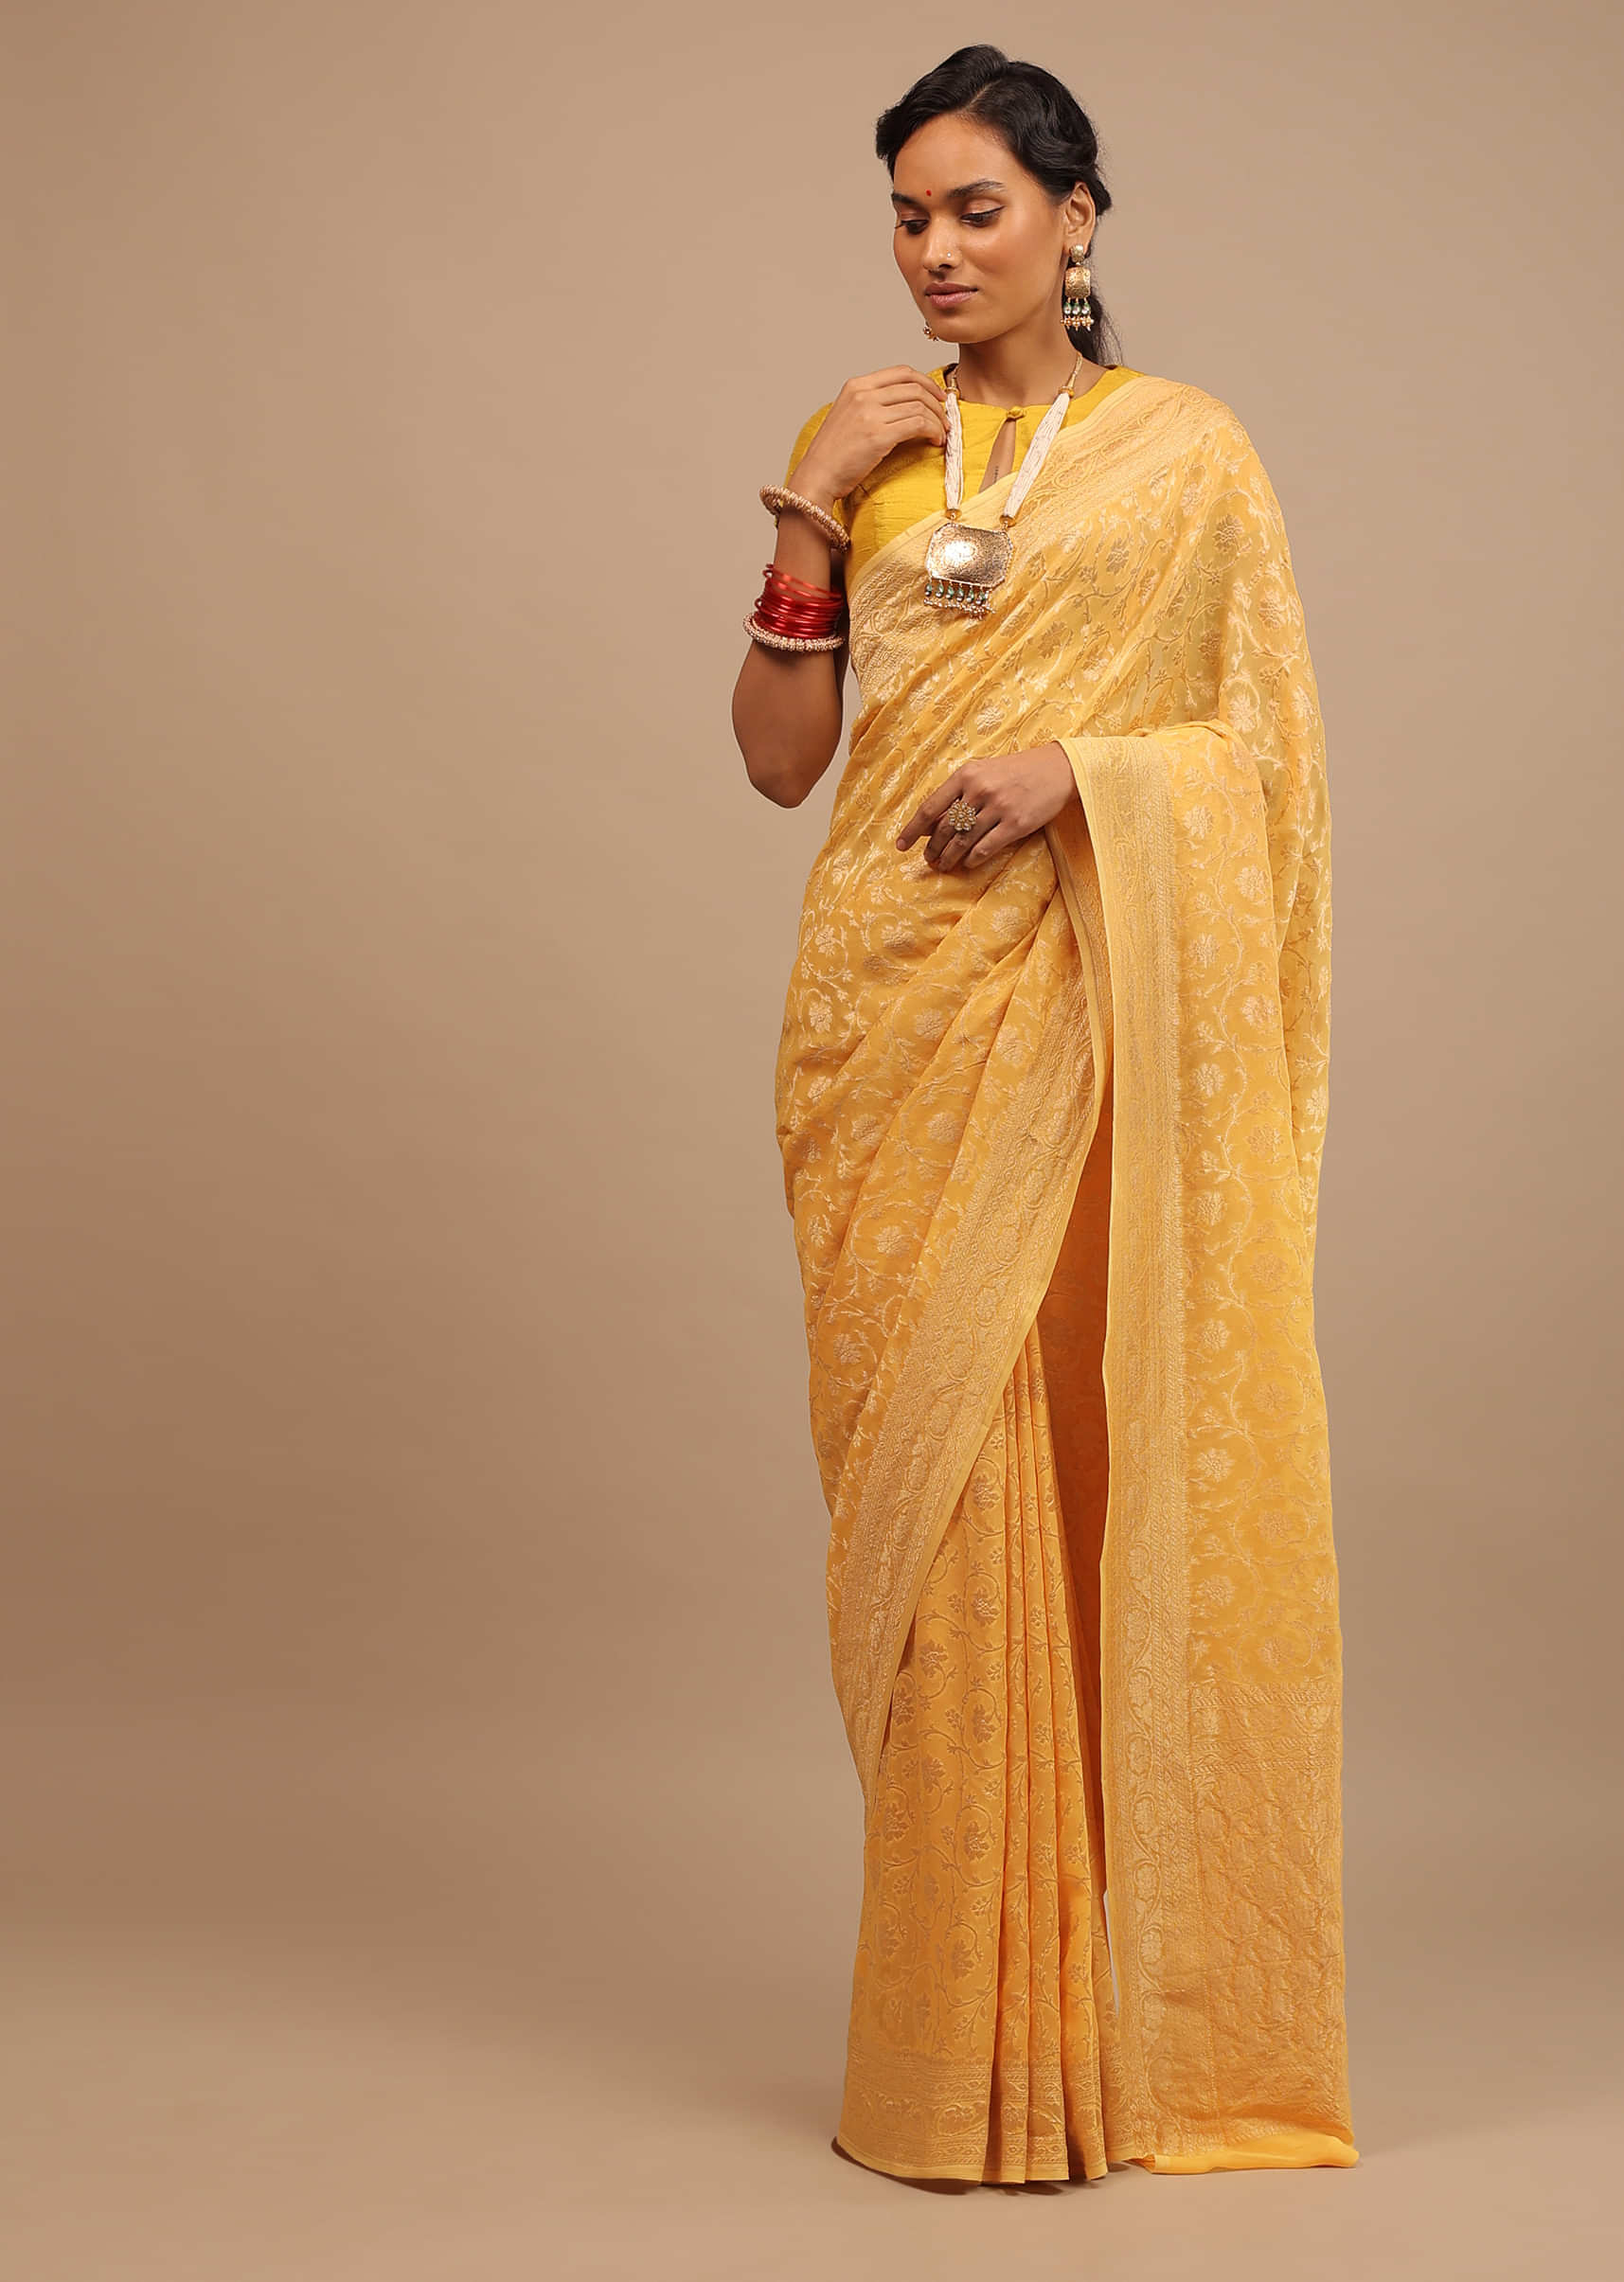 Daffodil Yellow Traditional Saree With Heavy Woven Brocade Work On Border And Pallu